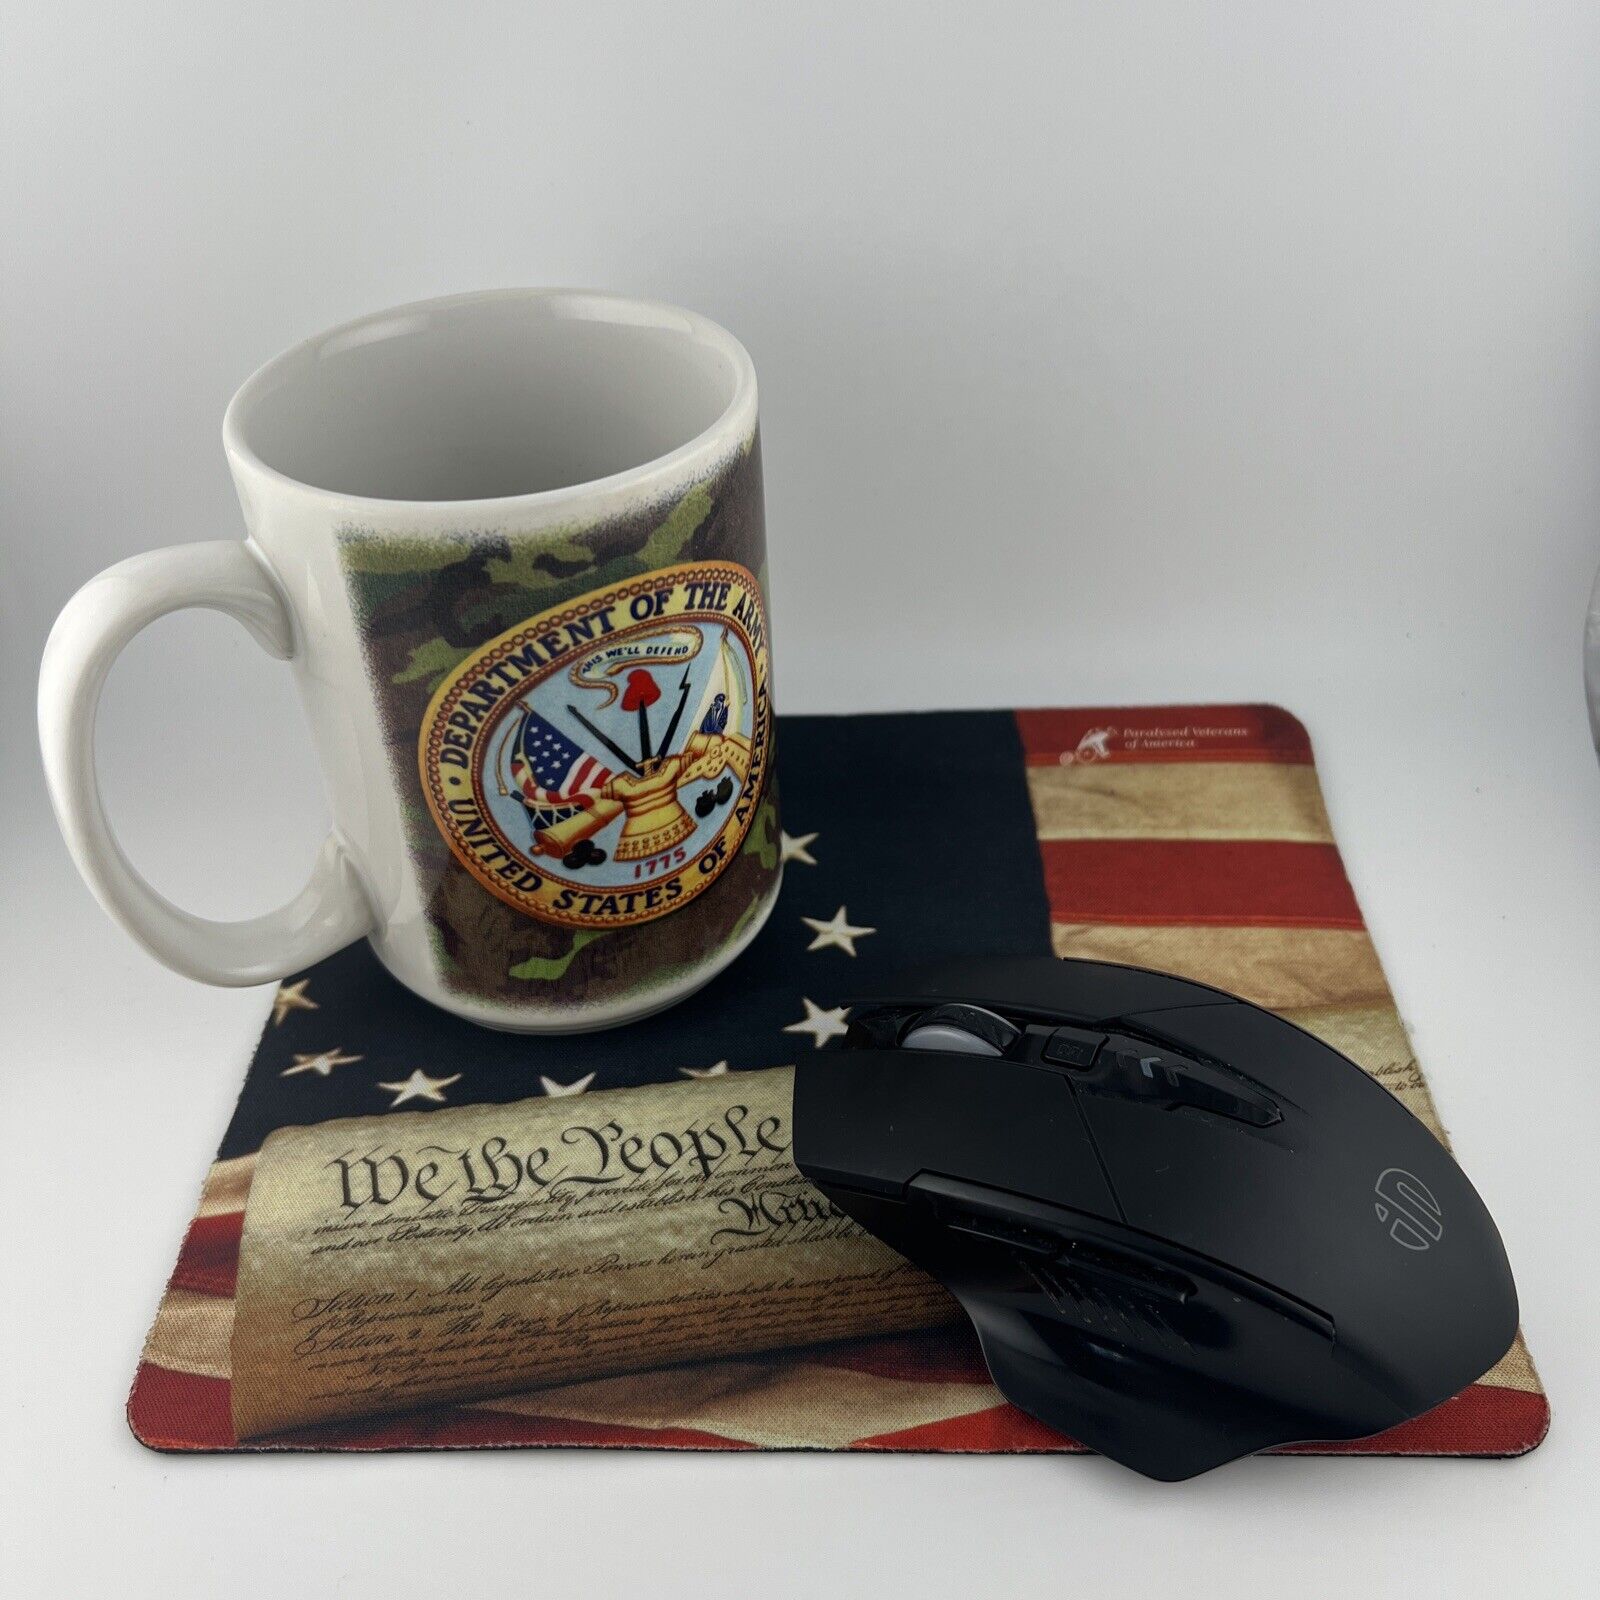 VINTAGE Department of the Army- USA 1775, Coffee Mug WITH Desk Mat Mouse Pad